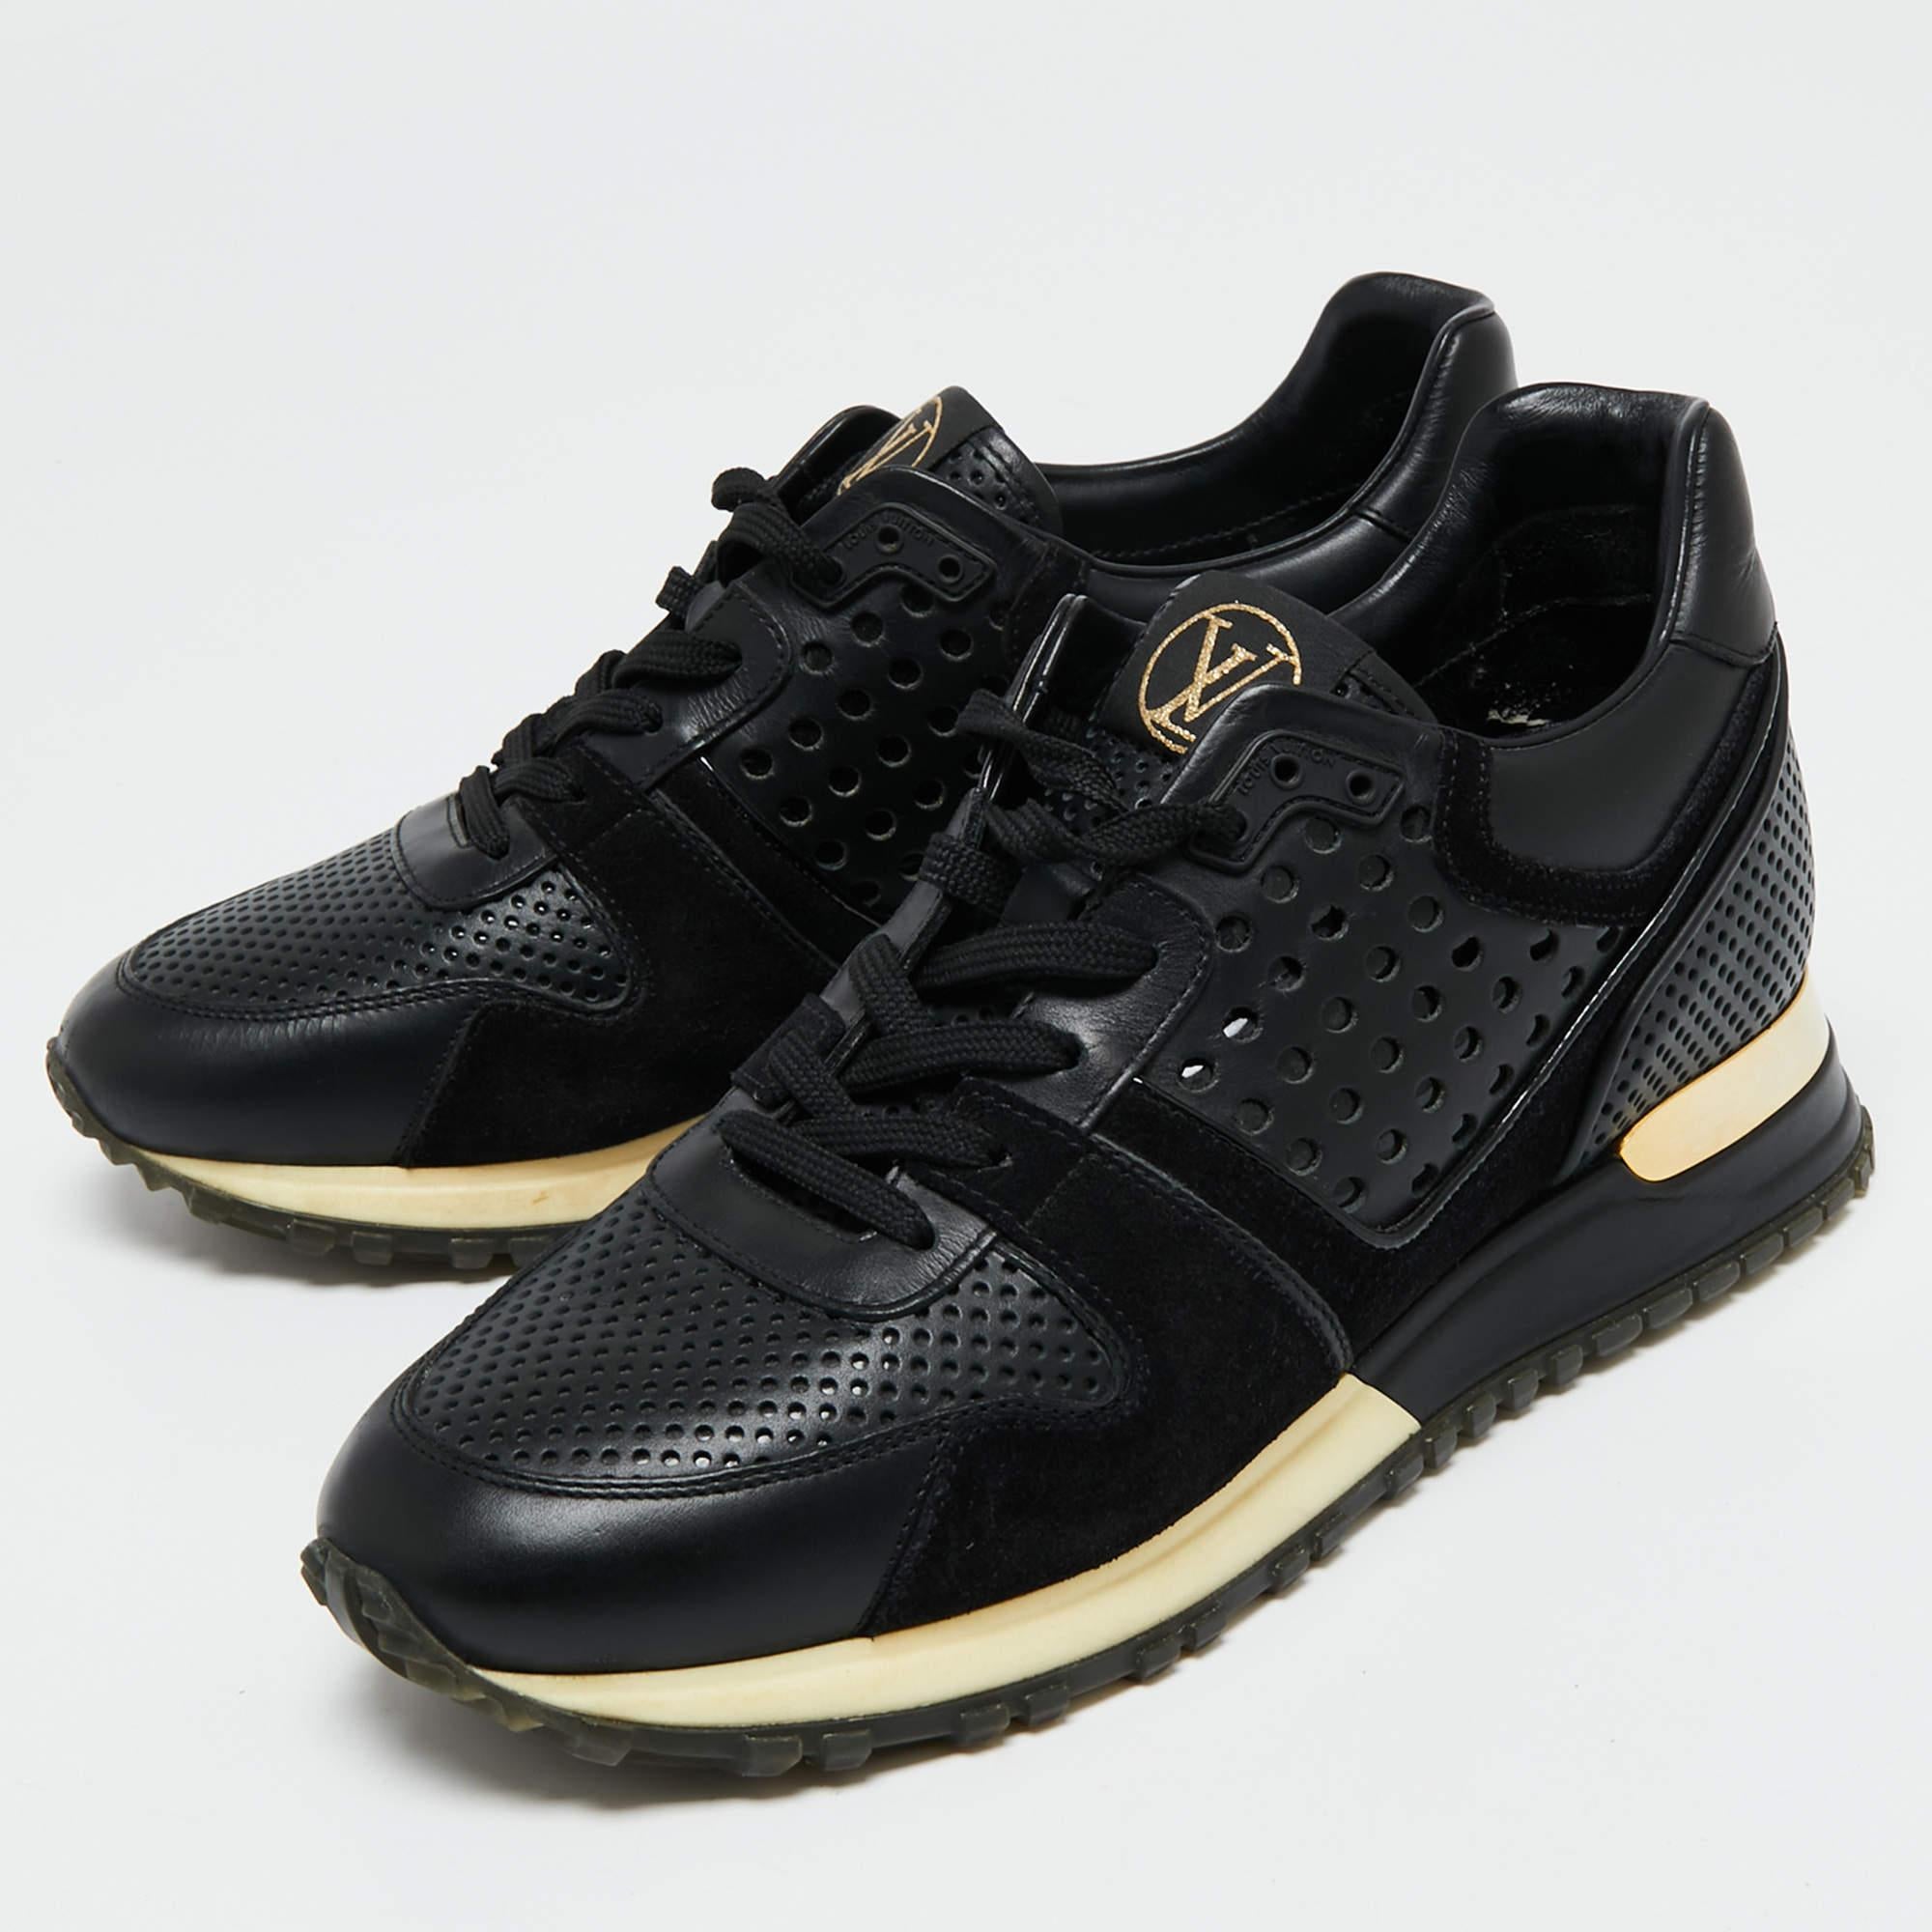 Louis Vuitton brings you these Run Away sneakers that are super sturdy, stunning, and stylish. They are crafted from black perforated leather and suede into a classic silhouette. They showcase gold-tone hardware and lace-up fastenings on the vamps.